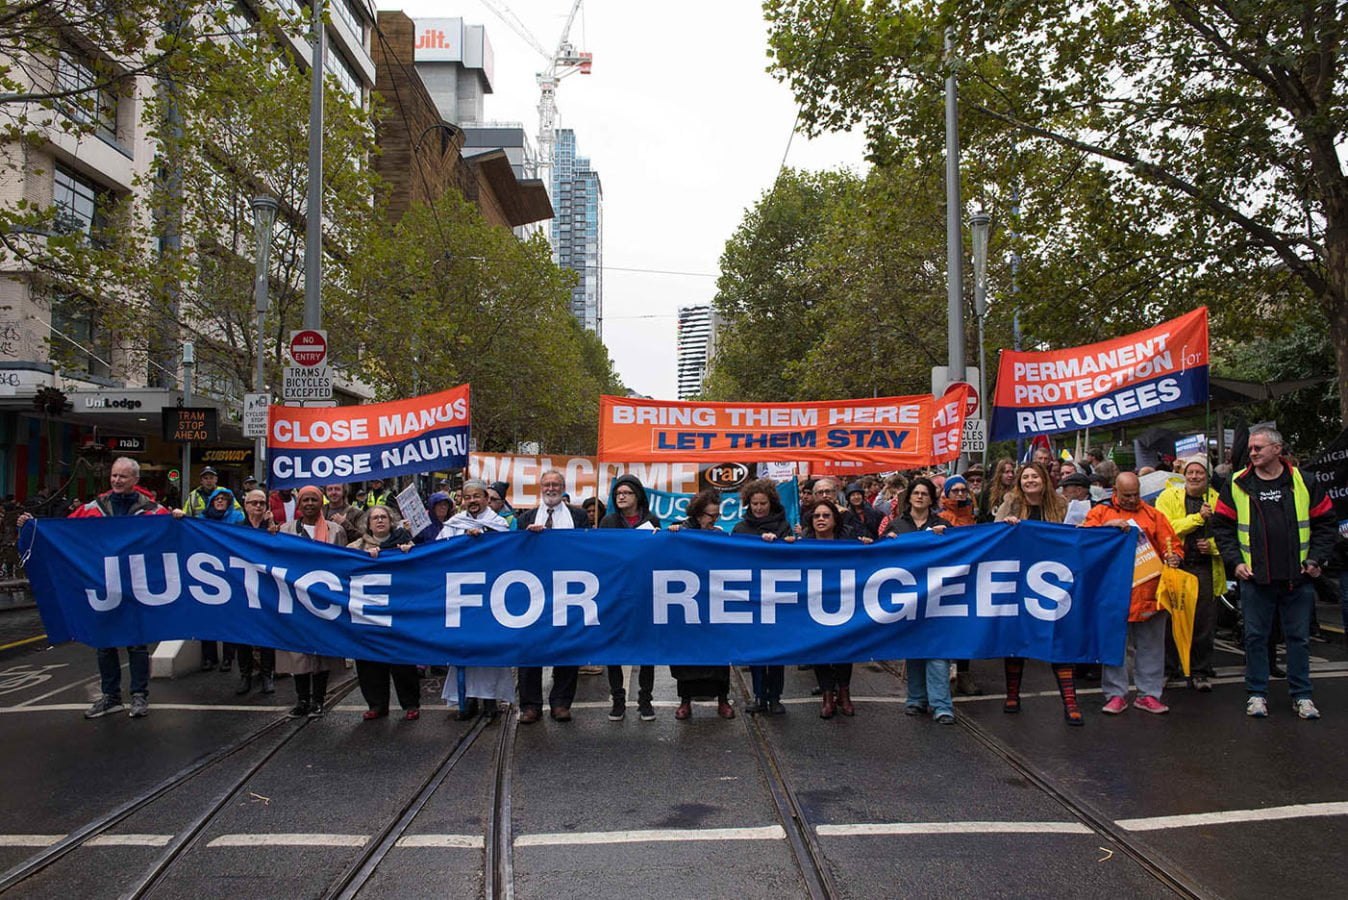 Protesters in Melbourne hold a blue banner that says 